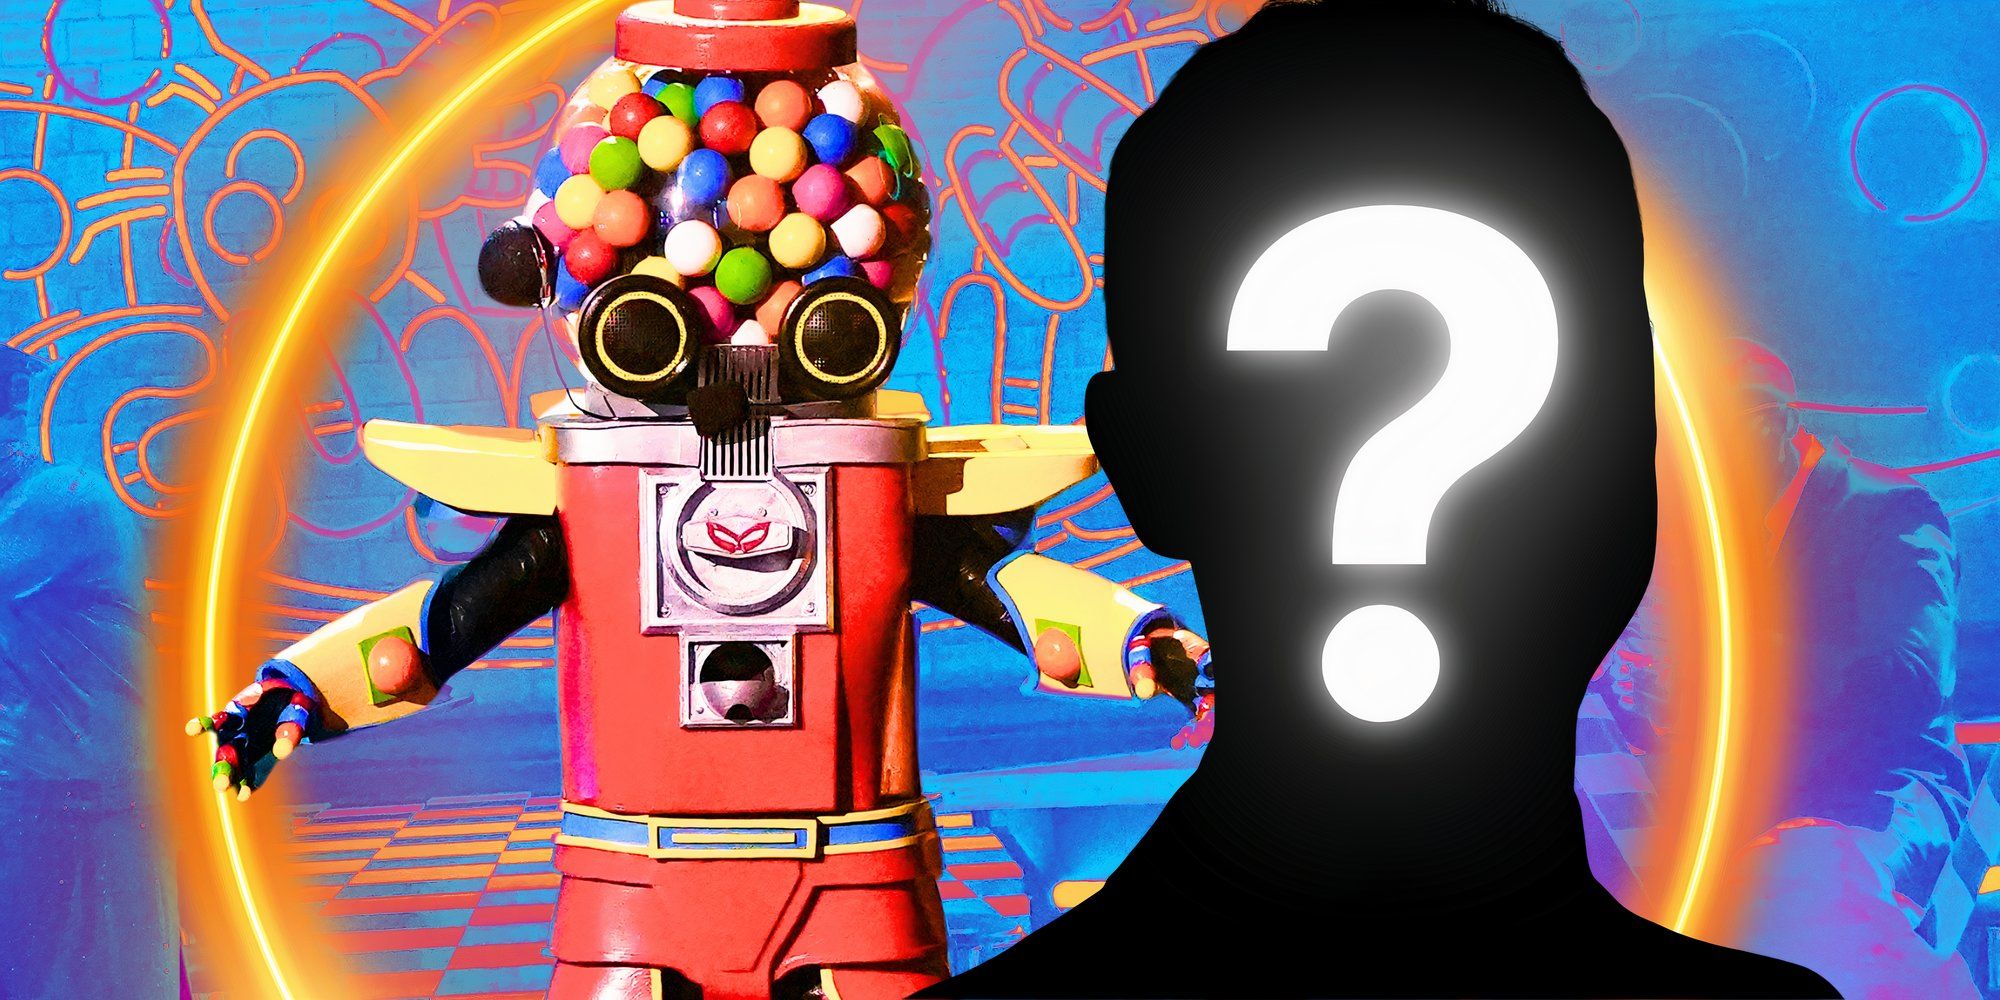 The Masked Singer's Gumball with his arms outstretched standing next to a mystery man.